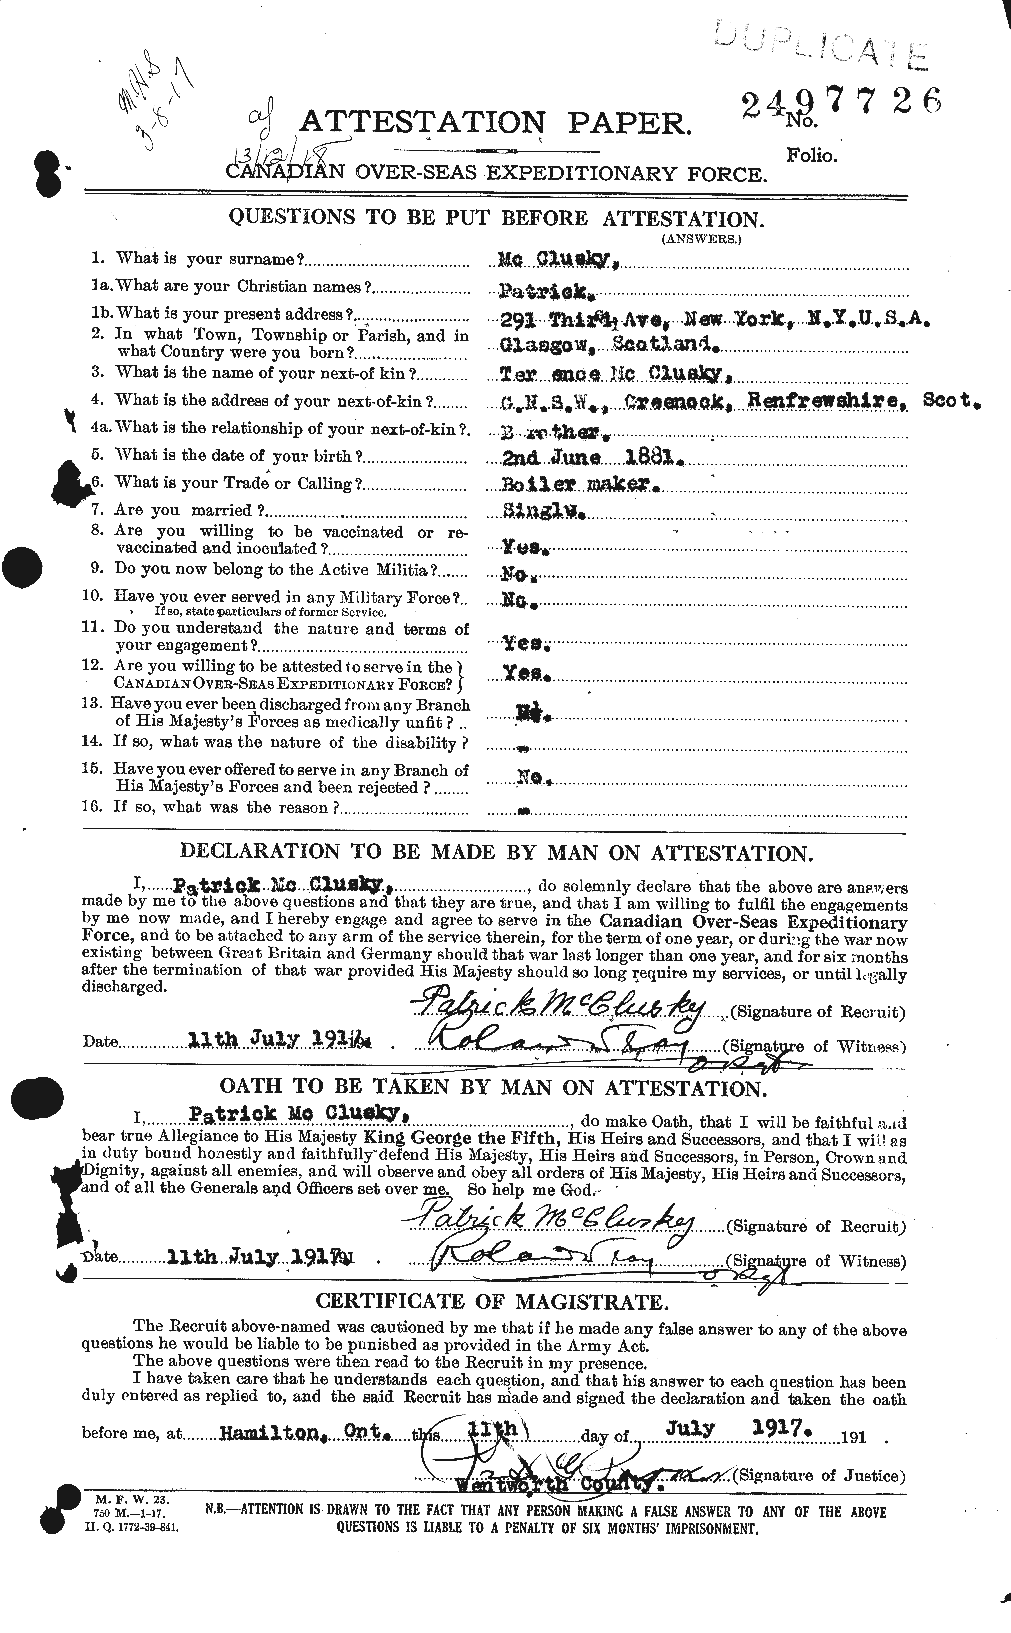 Personnel Records of the First World War - CEF 133467a